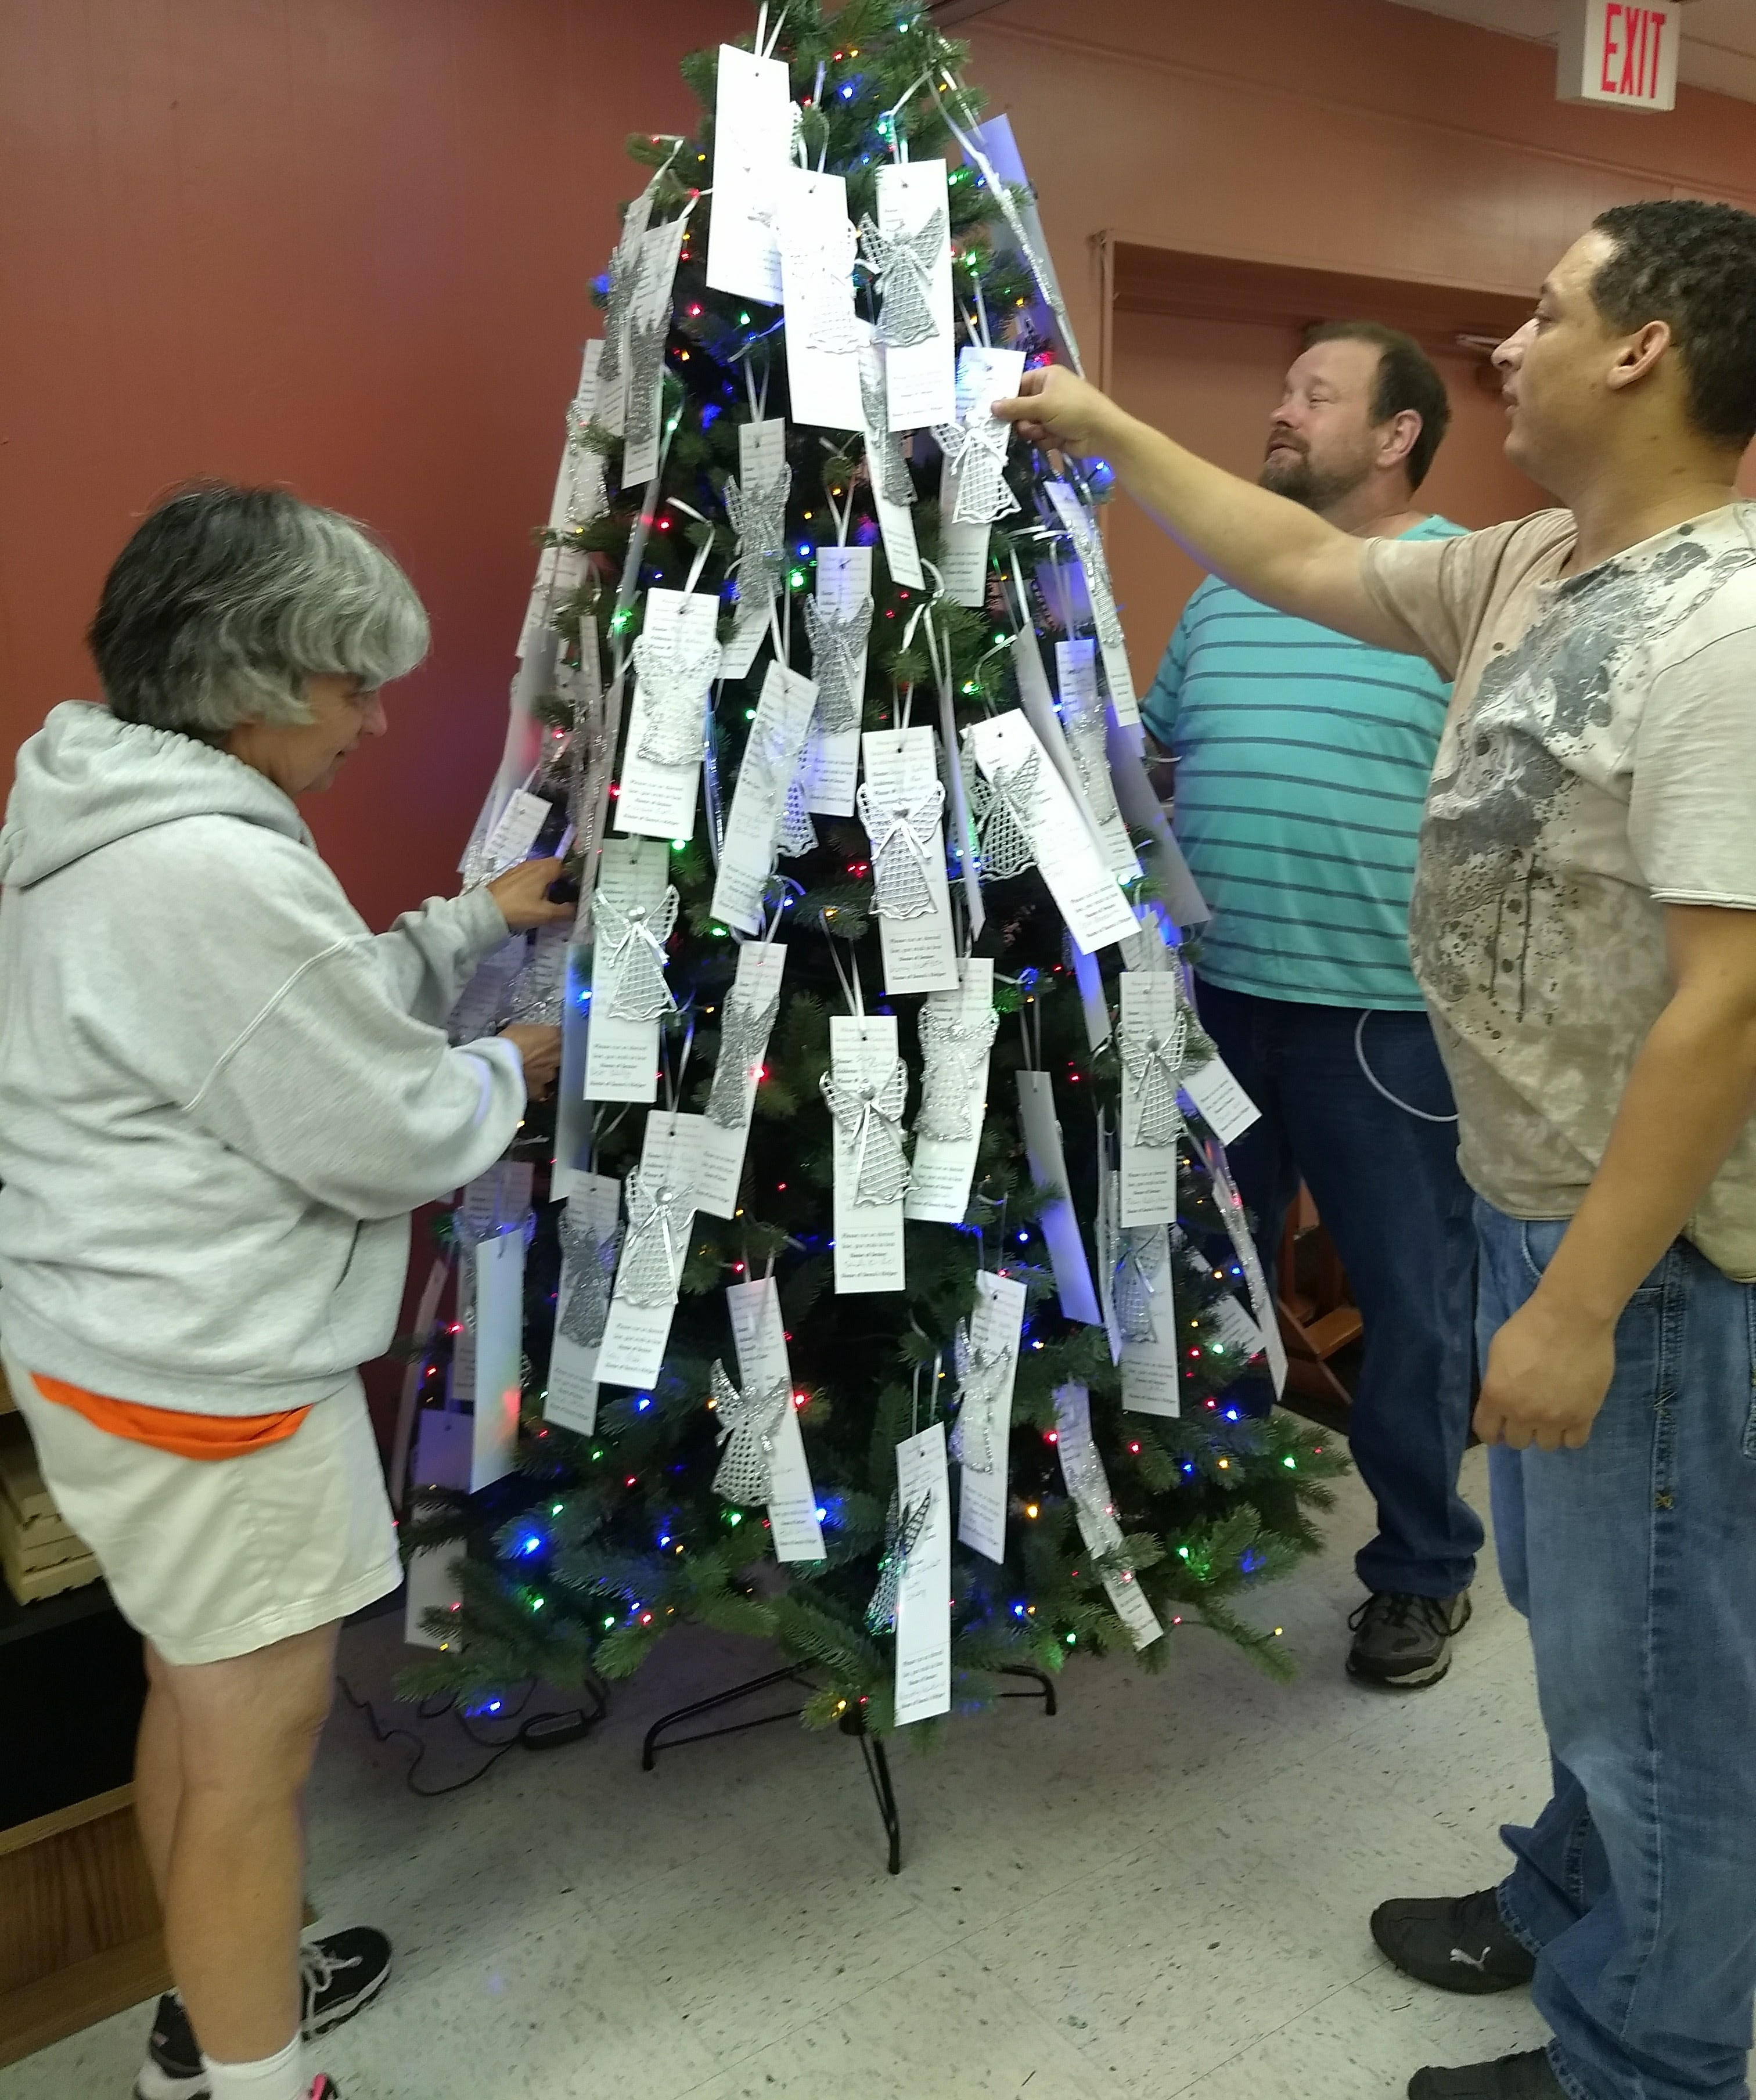 Golden Agers Gift Tree Now Up at the Sulphur Springs Senior Citizens Center